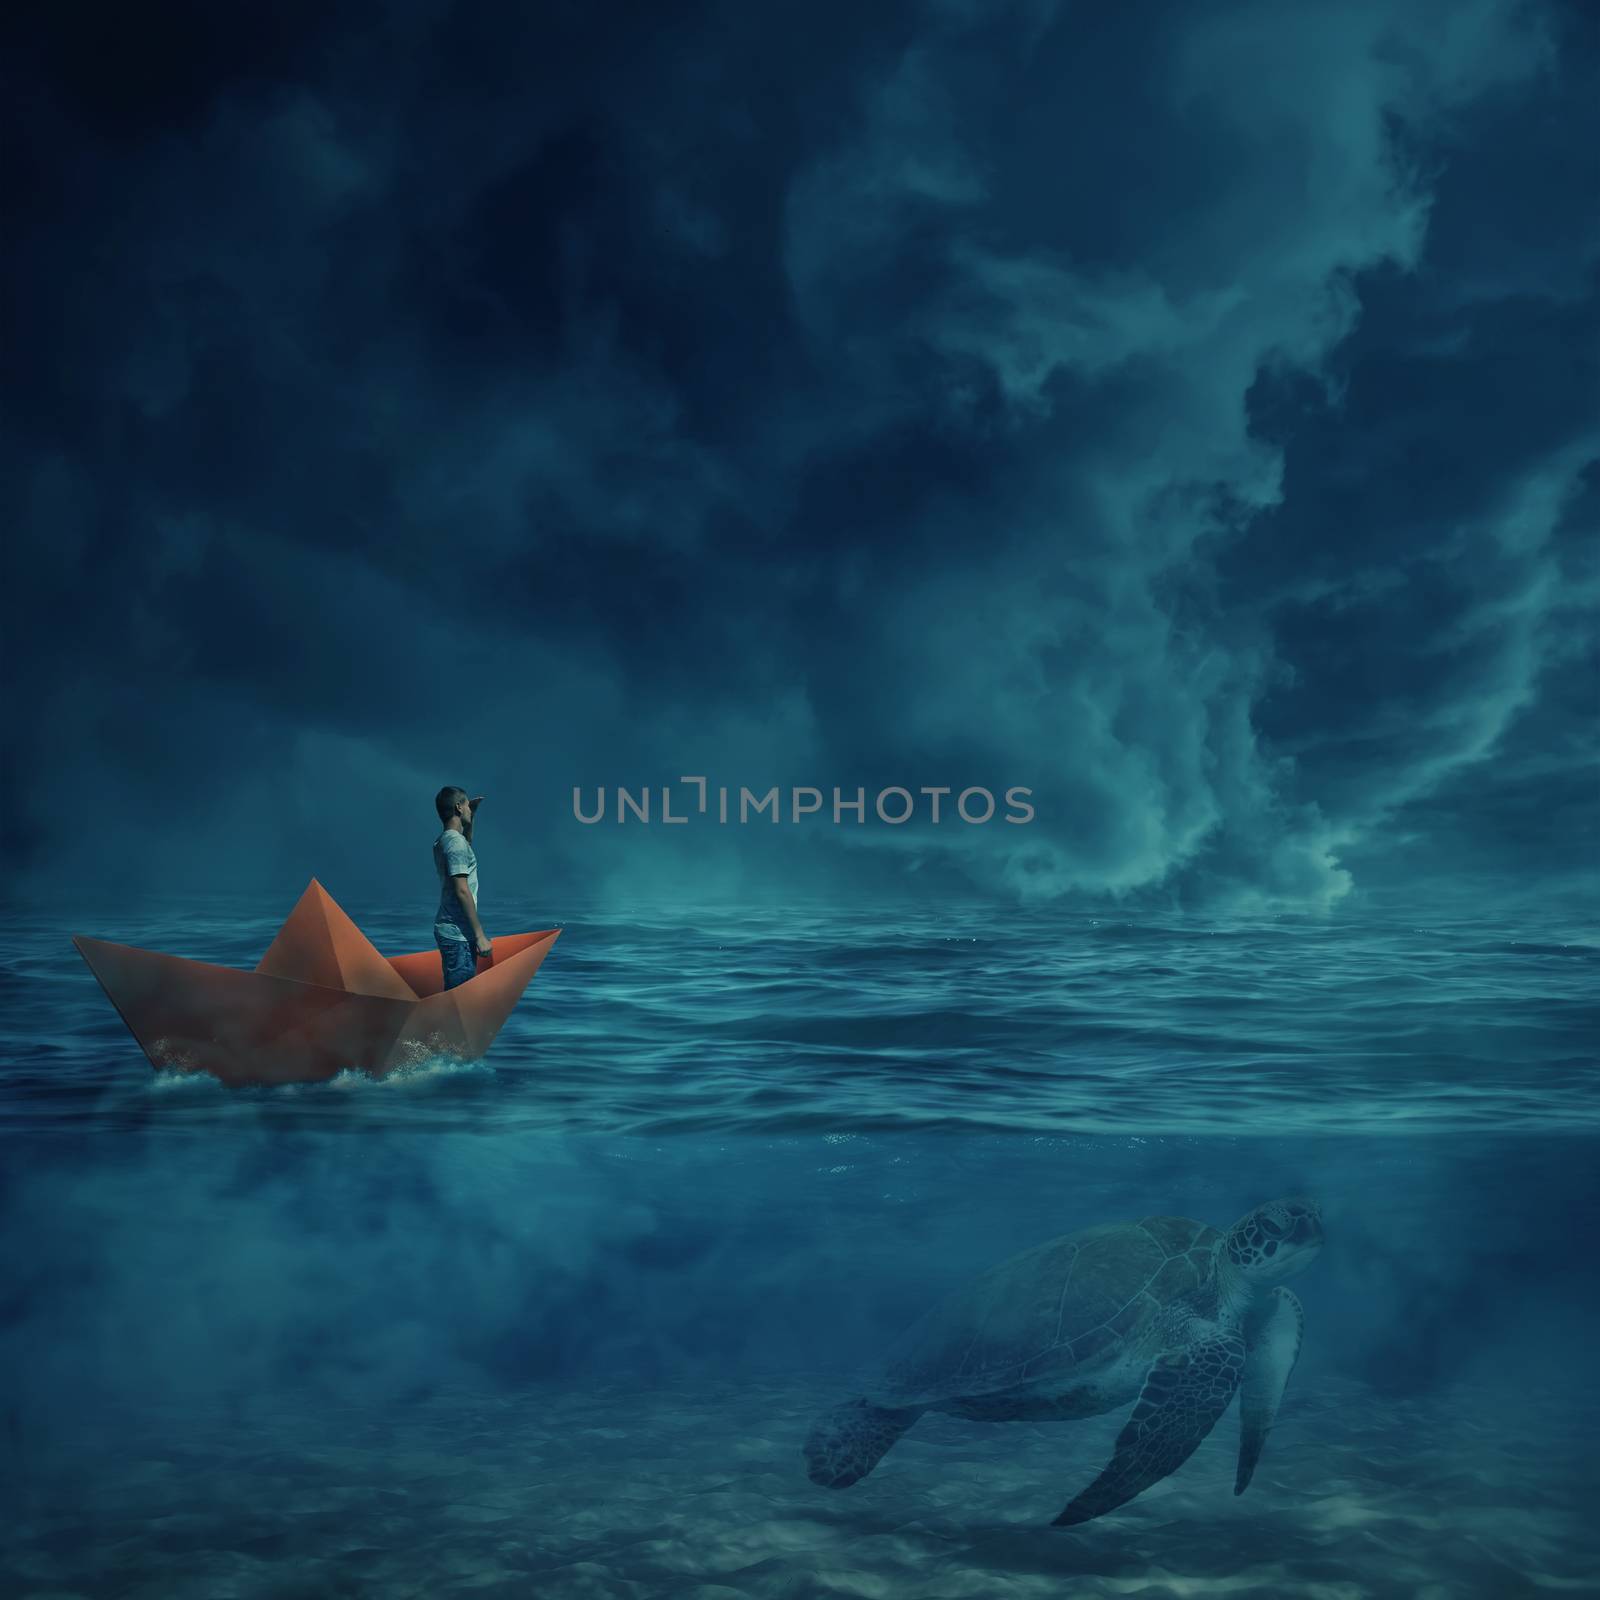 Young boy in a orange paper boat sail lost in the ocean, in a stormy night and a huge turtle underwater, as a guide, show him the way home. Adventure and journey concept.